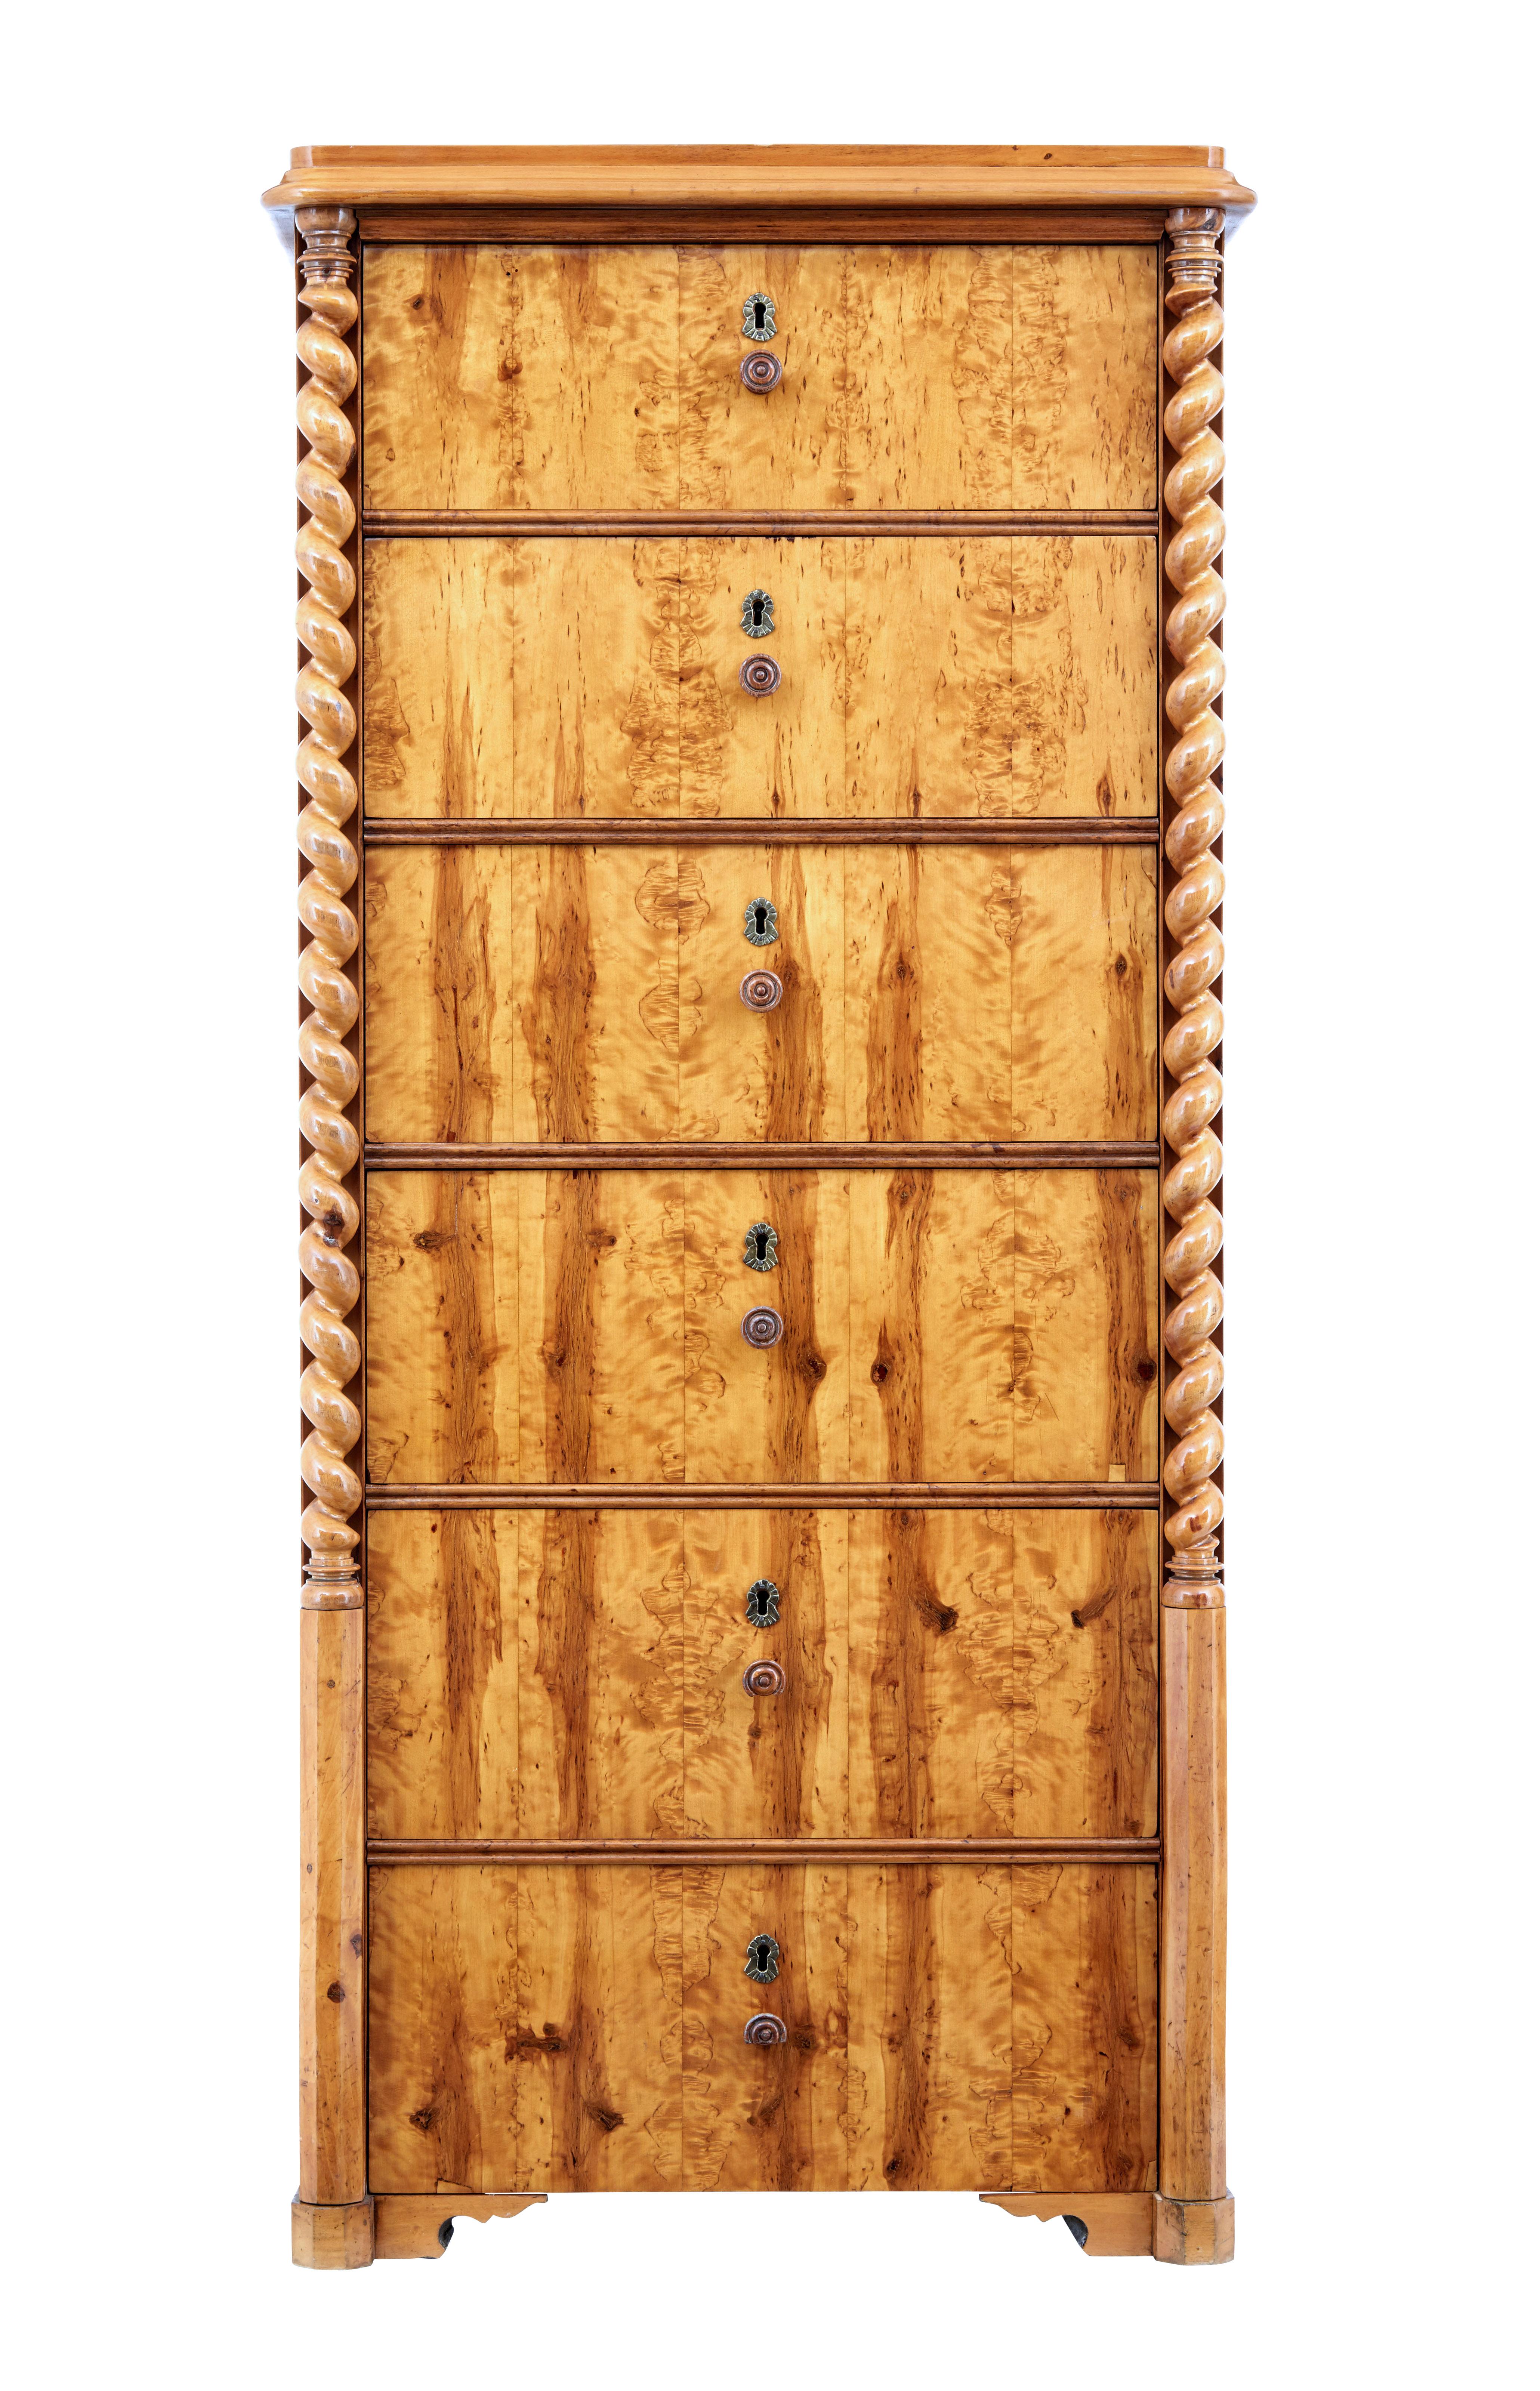 Elegant burr birch tallboy chest of drawers, circa 1870.

6 deep drawers veneered in matched burr birch veneer, each fitted with a single turned wooden handle. Drawers are flanked each side by a barley twist column. Plain birch sides.

Rich